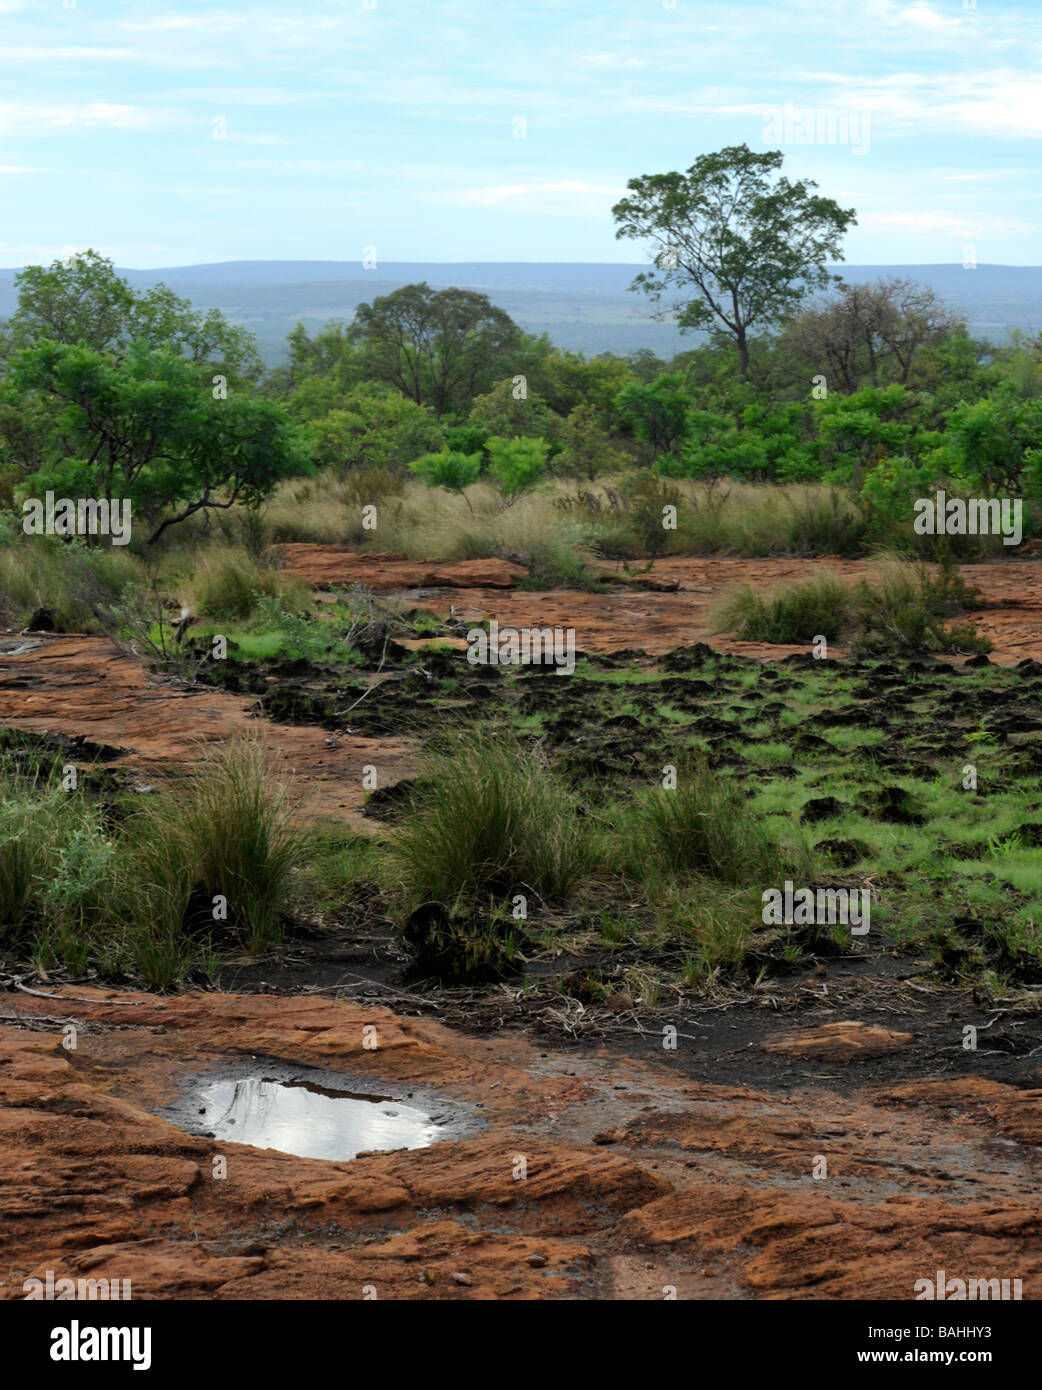 A view across the mountainous vegetation of the Waterberg biosphere in South Africa. Stock Photo